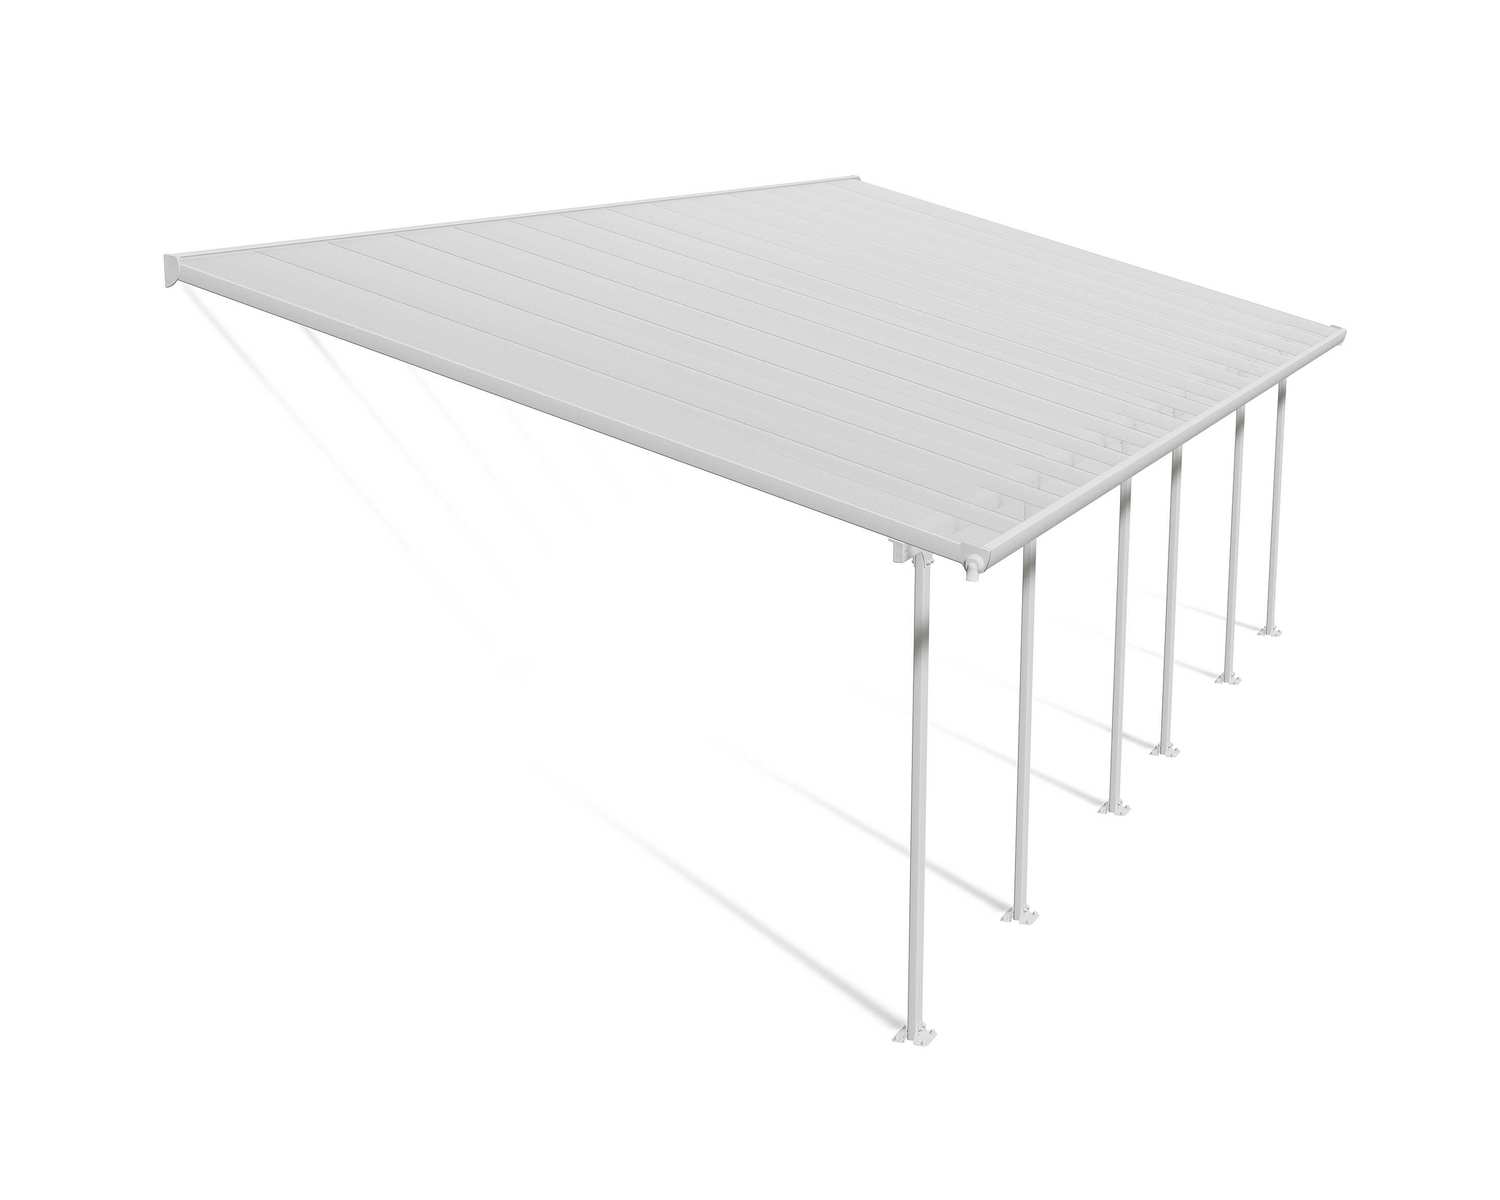 Patio Cover Kit Feria 4 ft. x 8.50 ft. White Structure & Clear Multi Wall Glazing